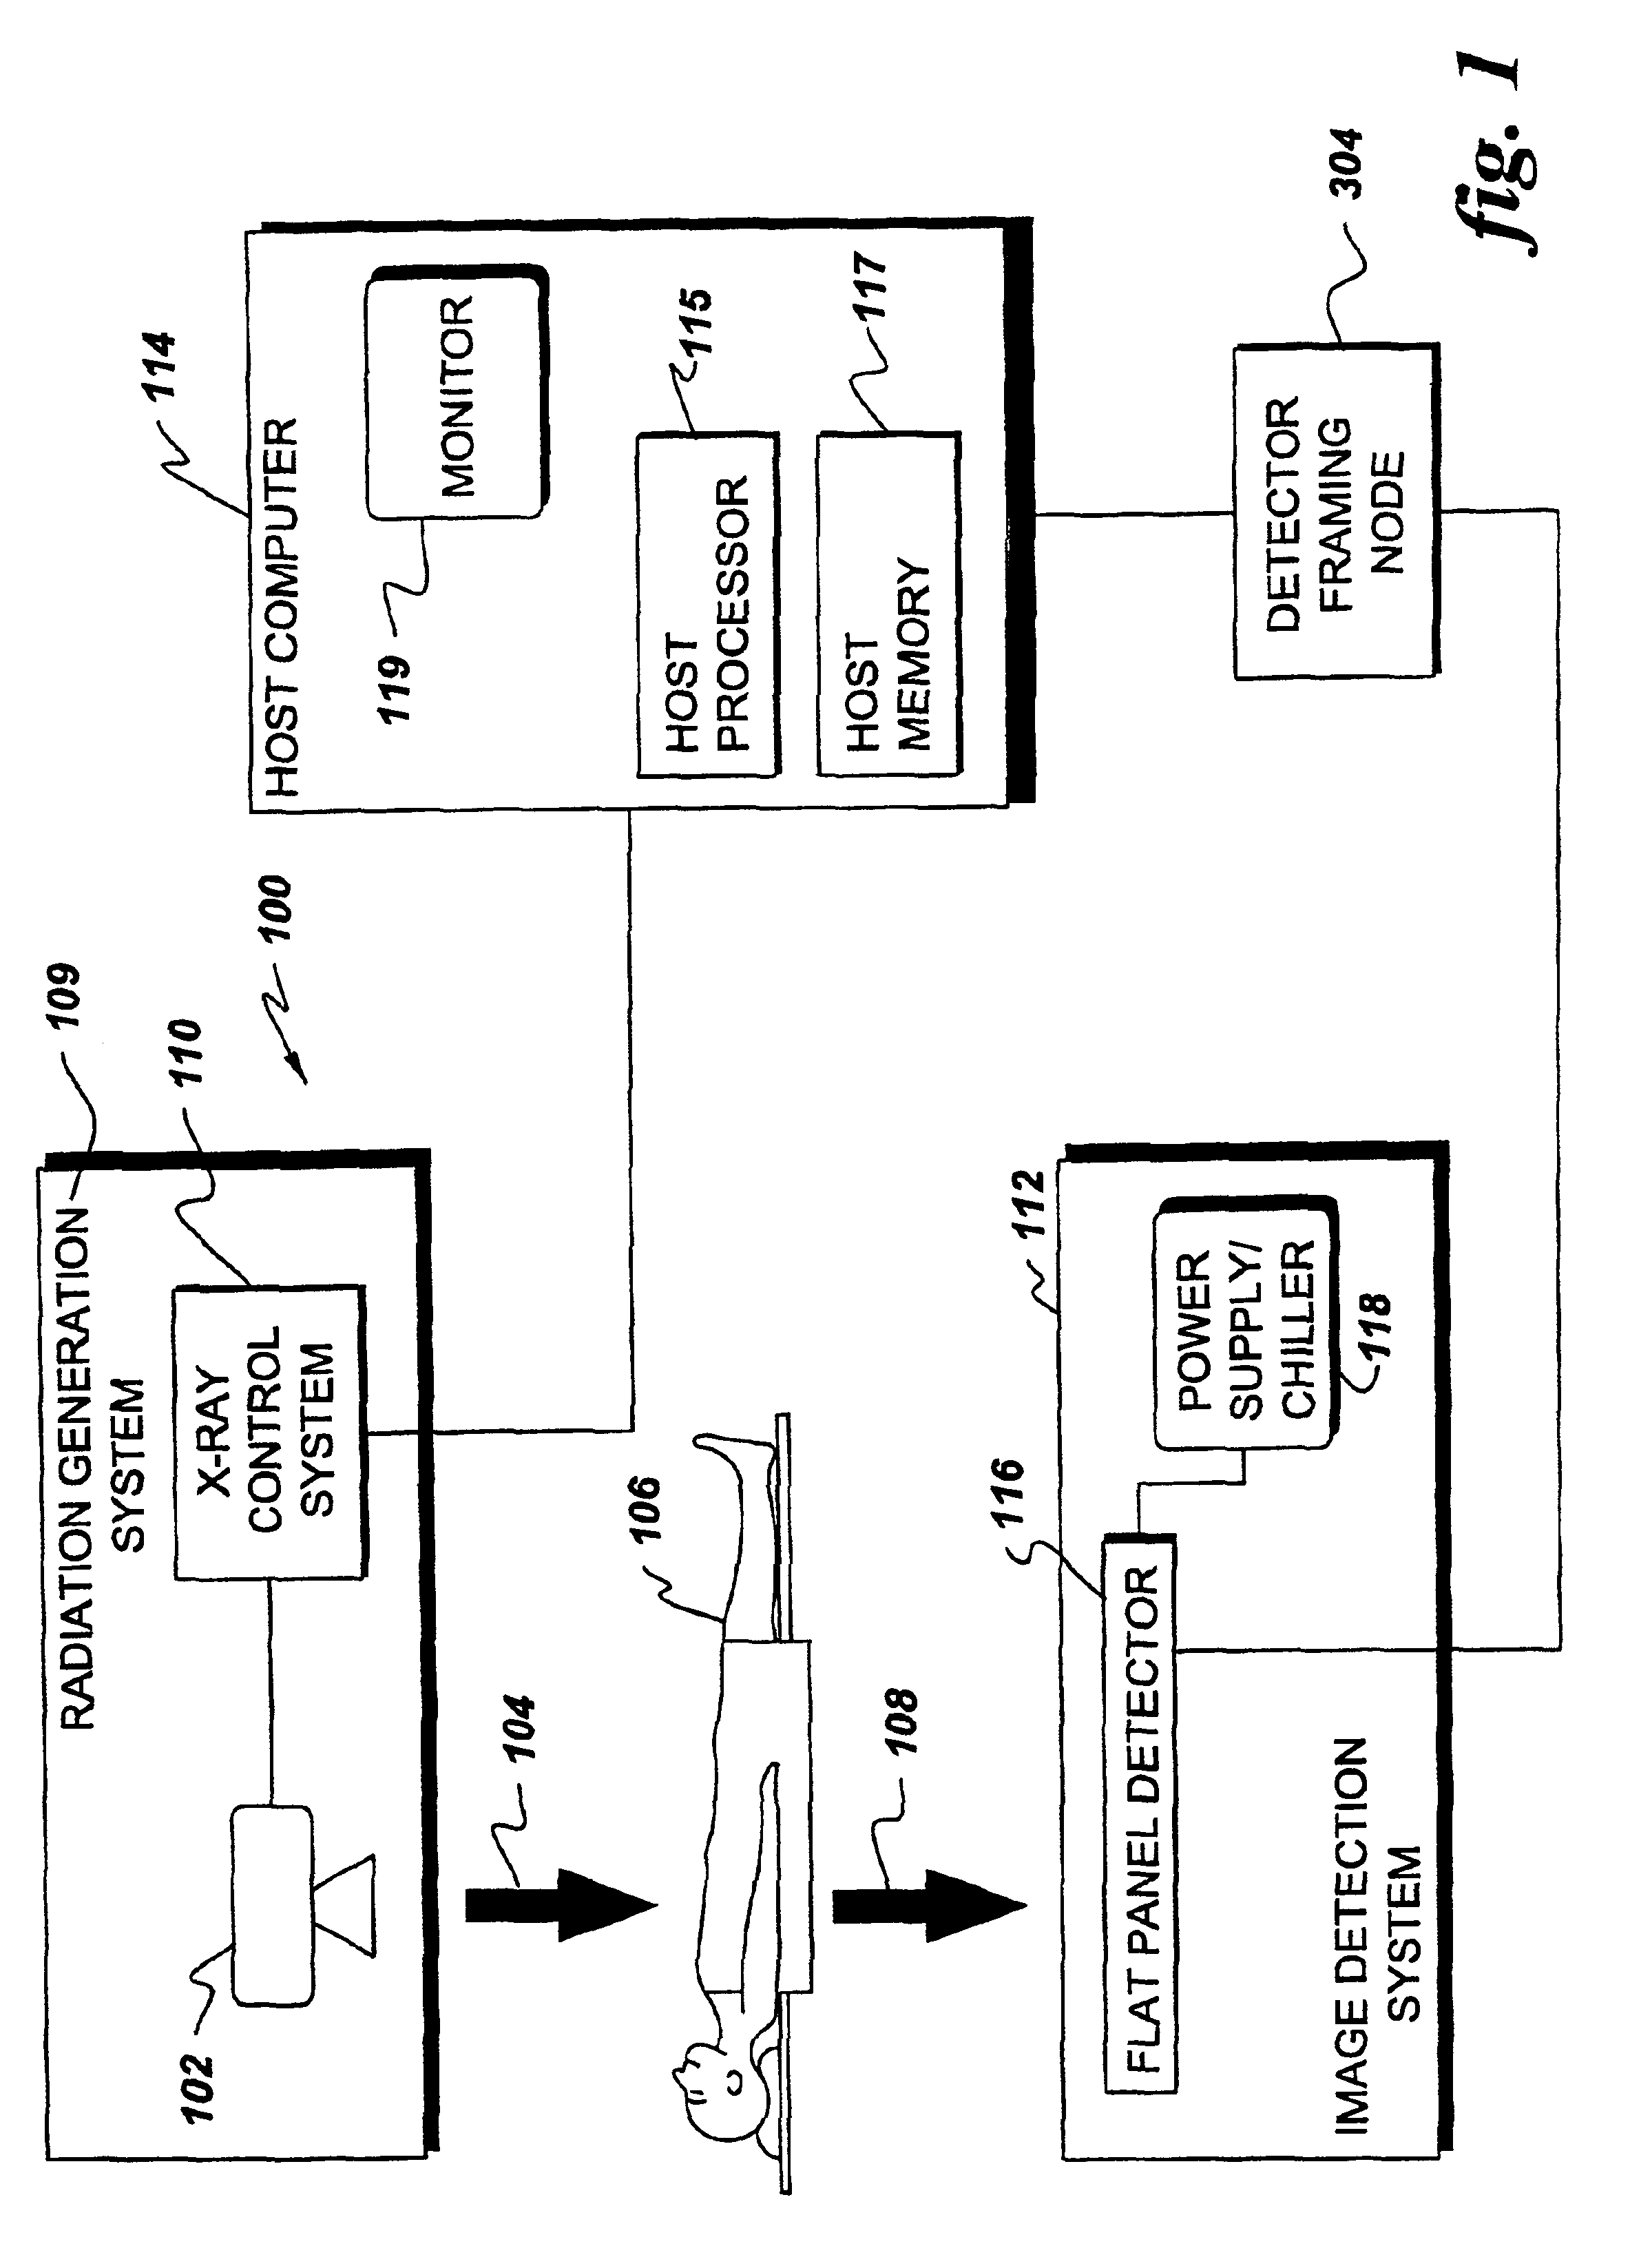 Communication of image data from image detector to host computer